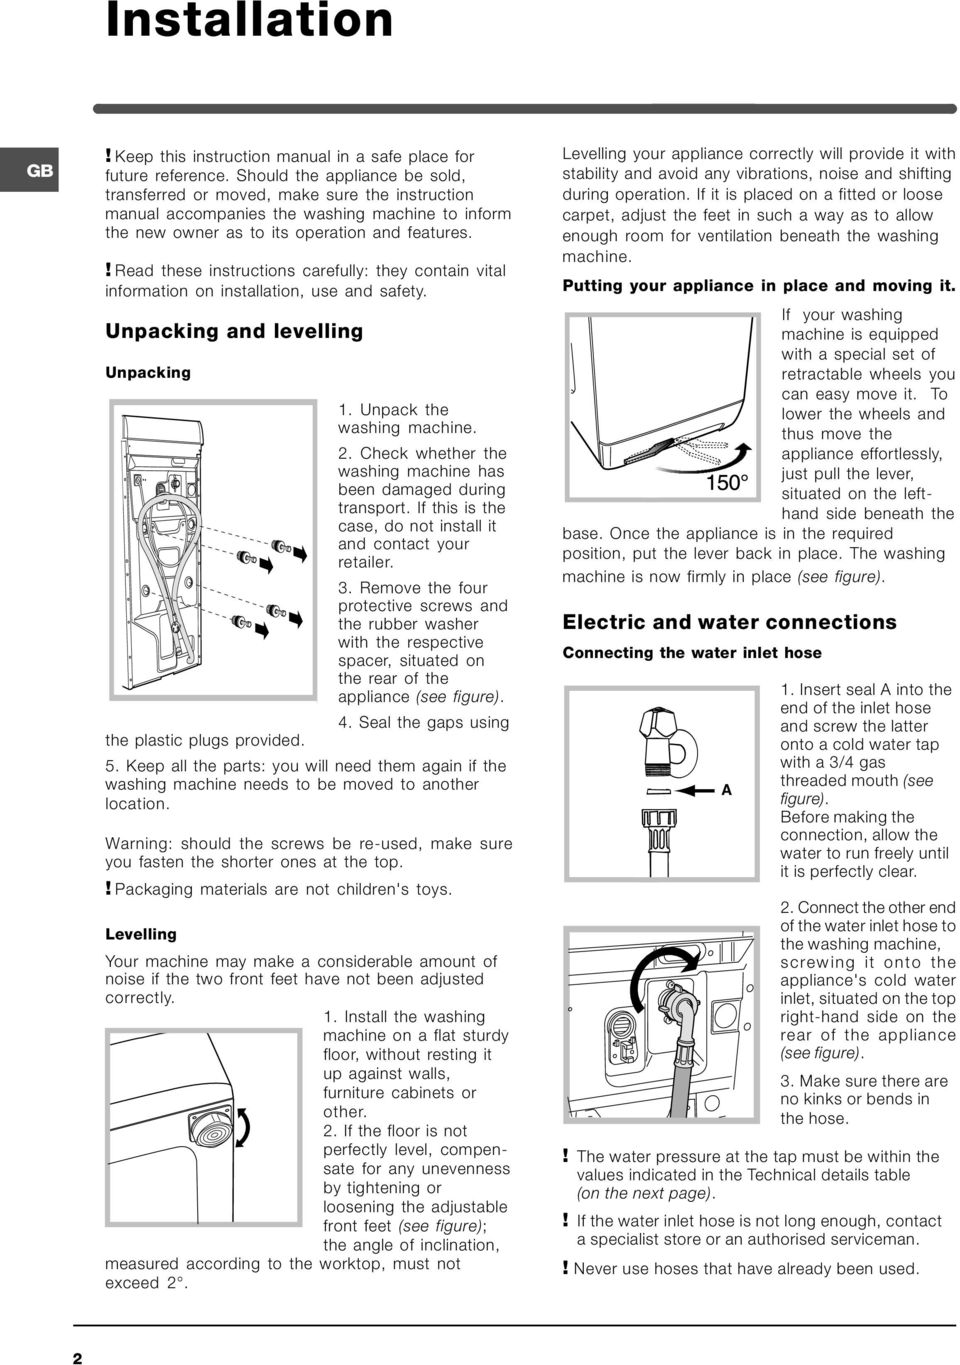 ! Read these instructions carefully: they contain vital information on installation, use and safety. Unpacking and levelling Unpacking the plastic plugs provided. 1. Unpack the washing machine. 2.